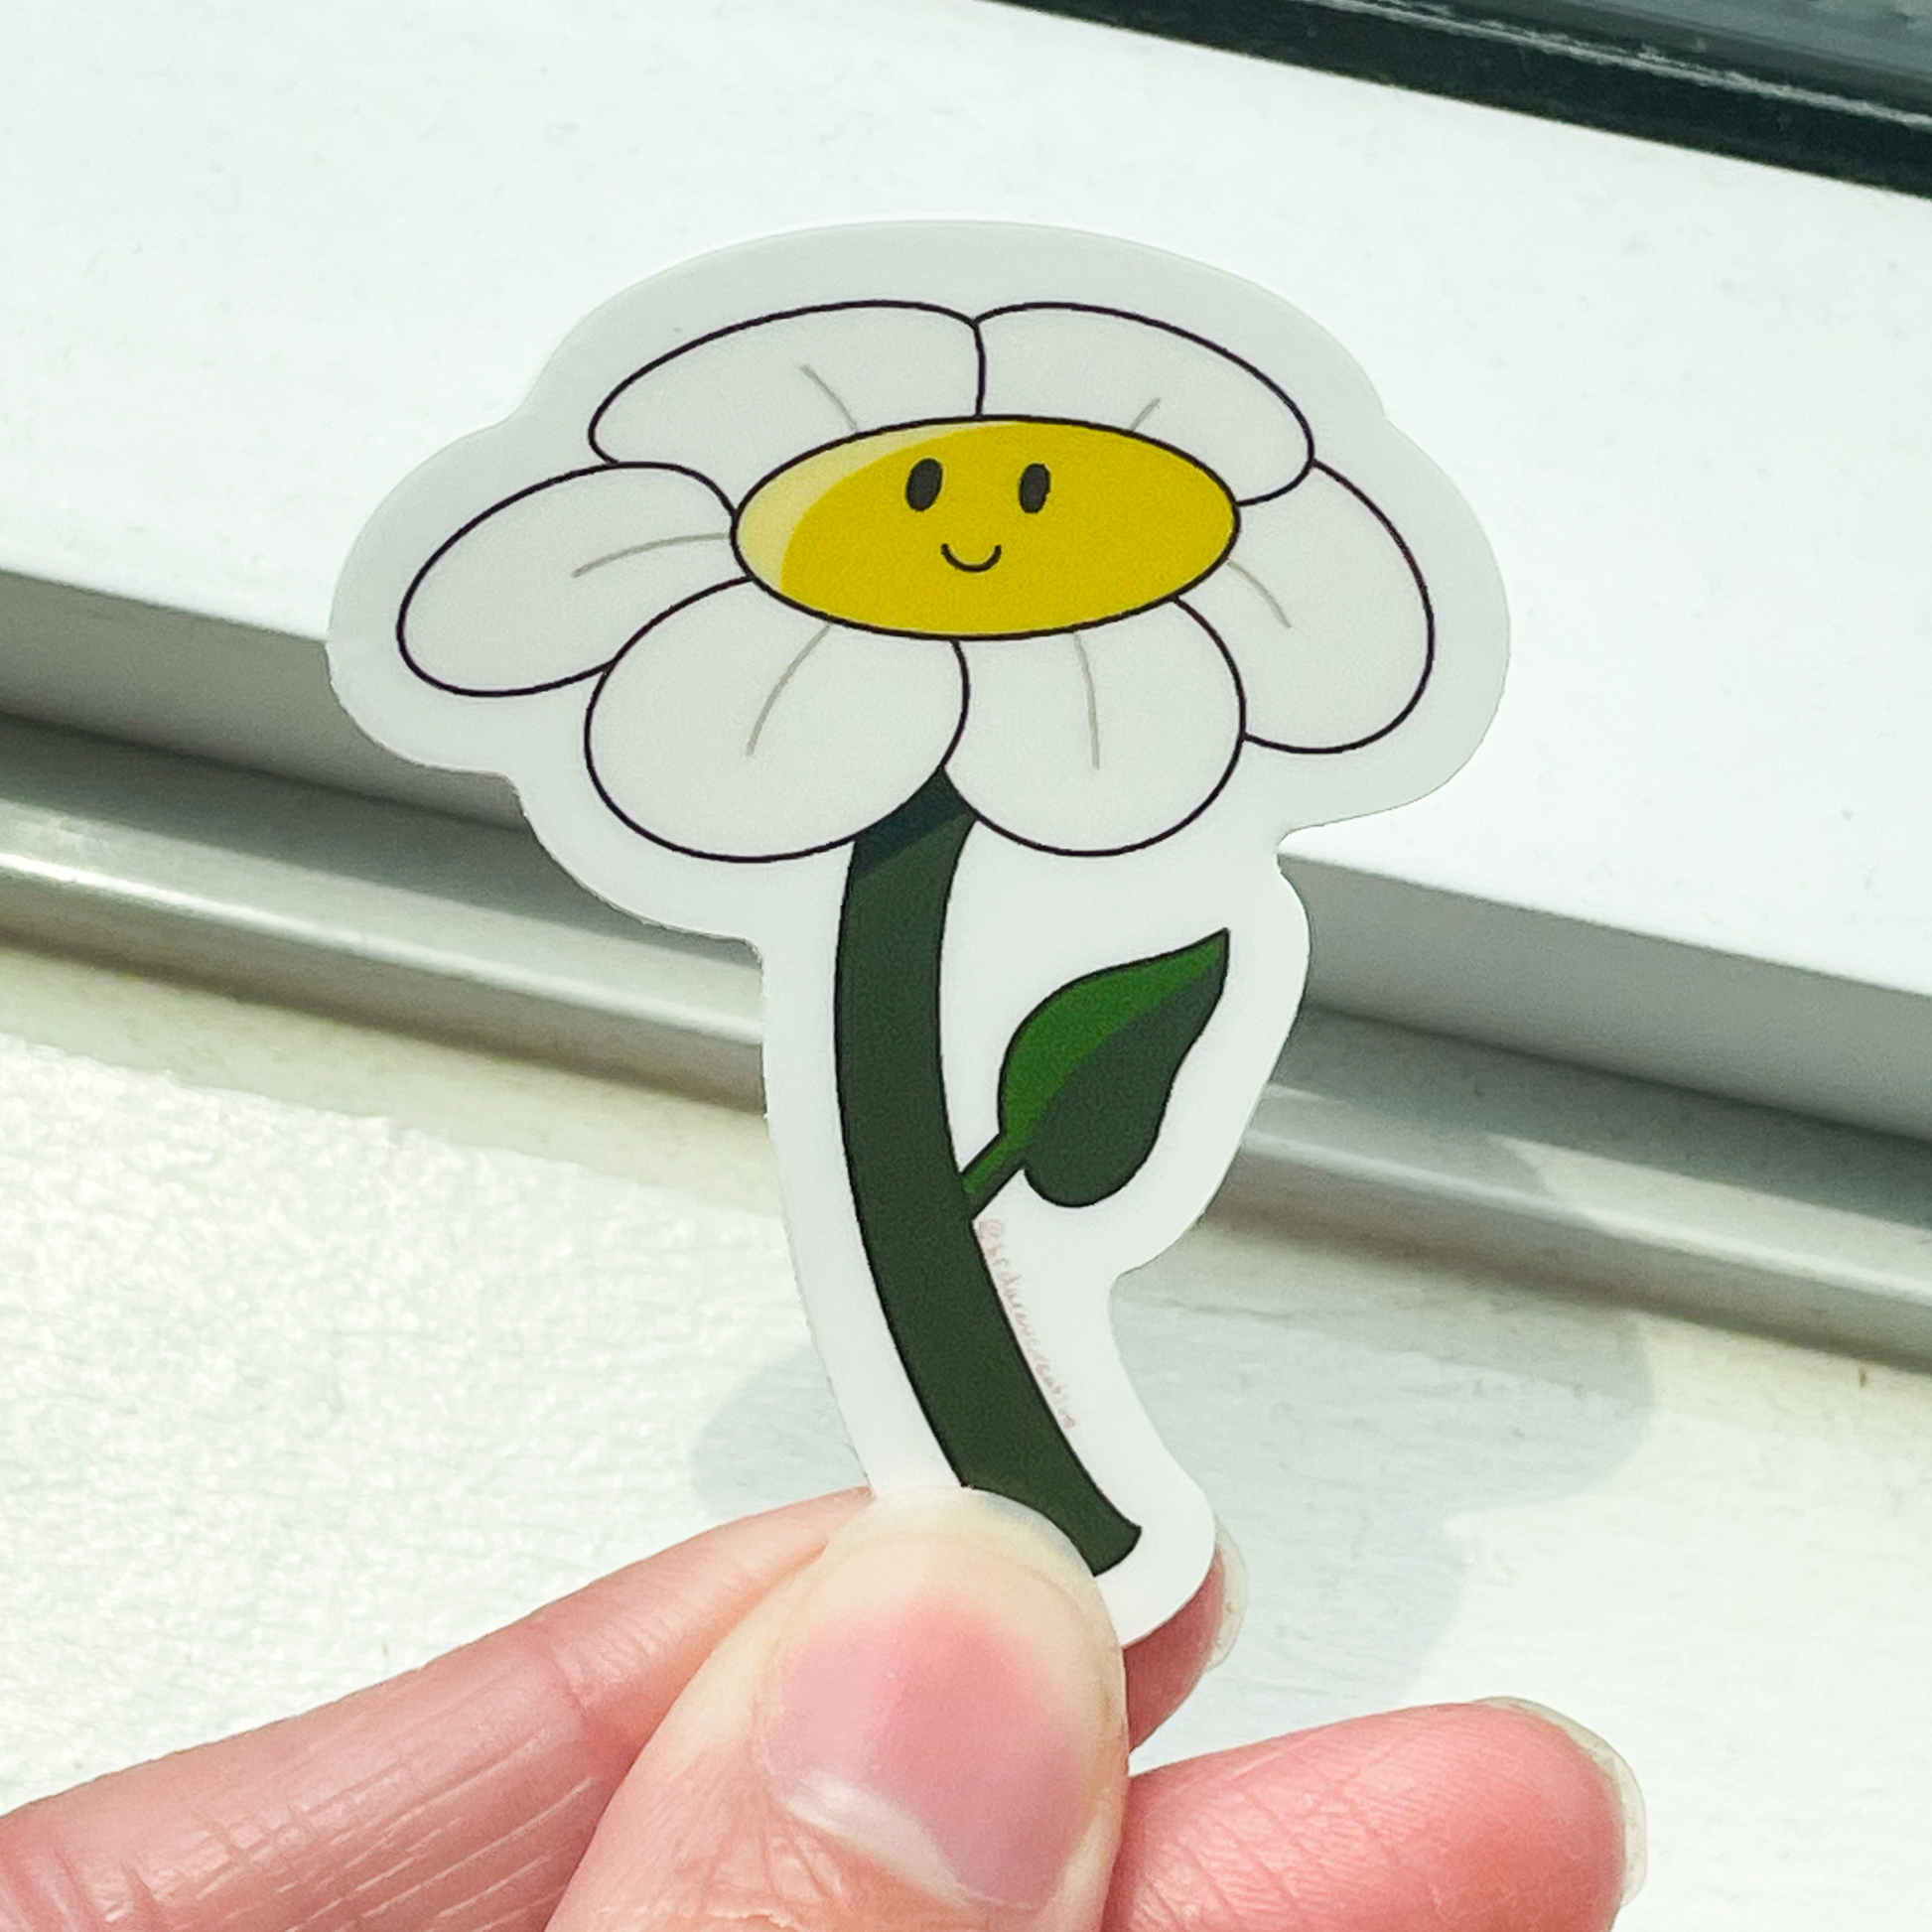 A white window sill background with a flower sticker on top that has white petals, a dark green stem, and a yellow centre with a smiling face.